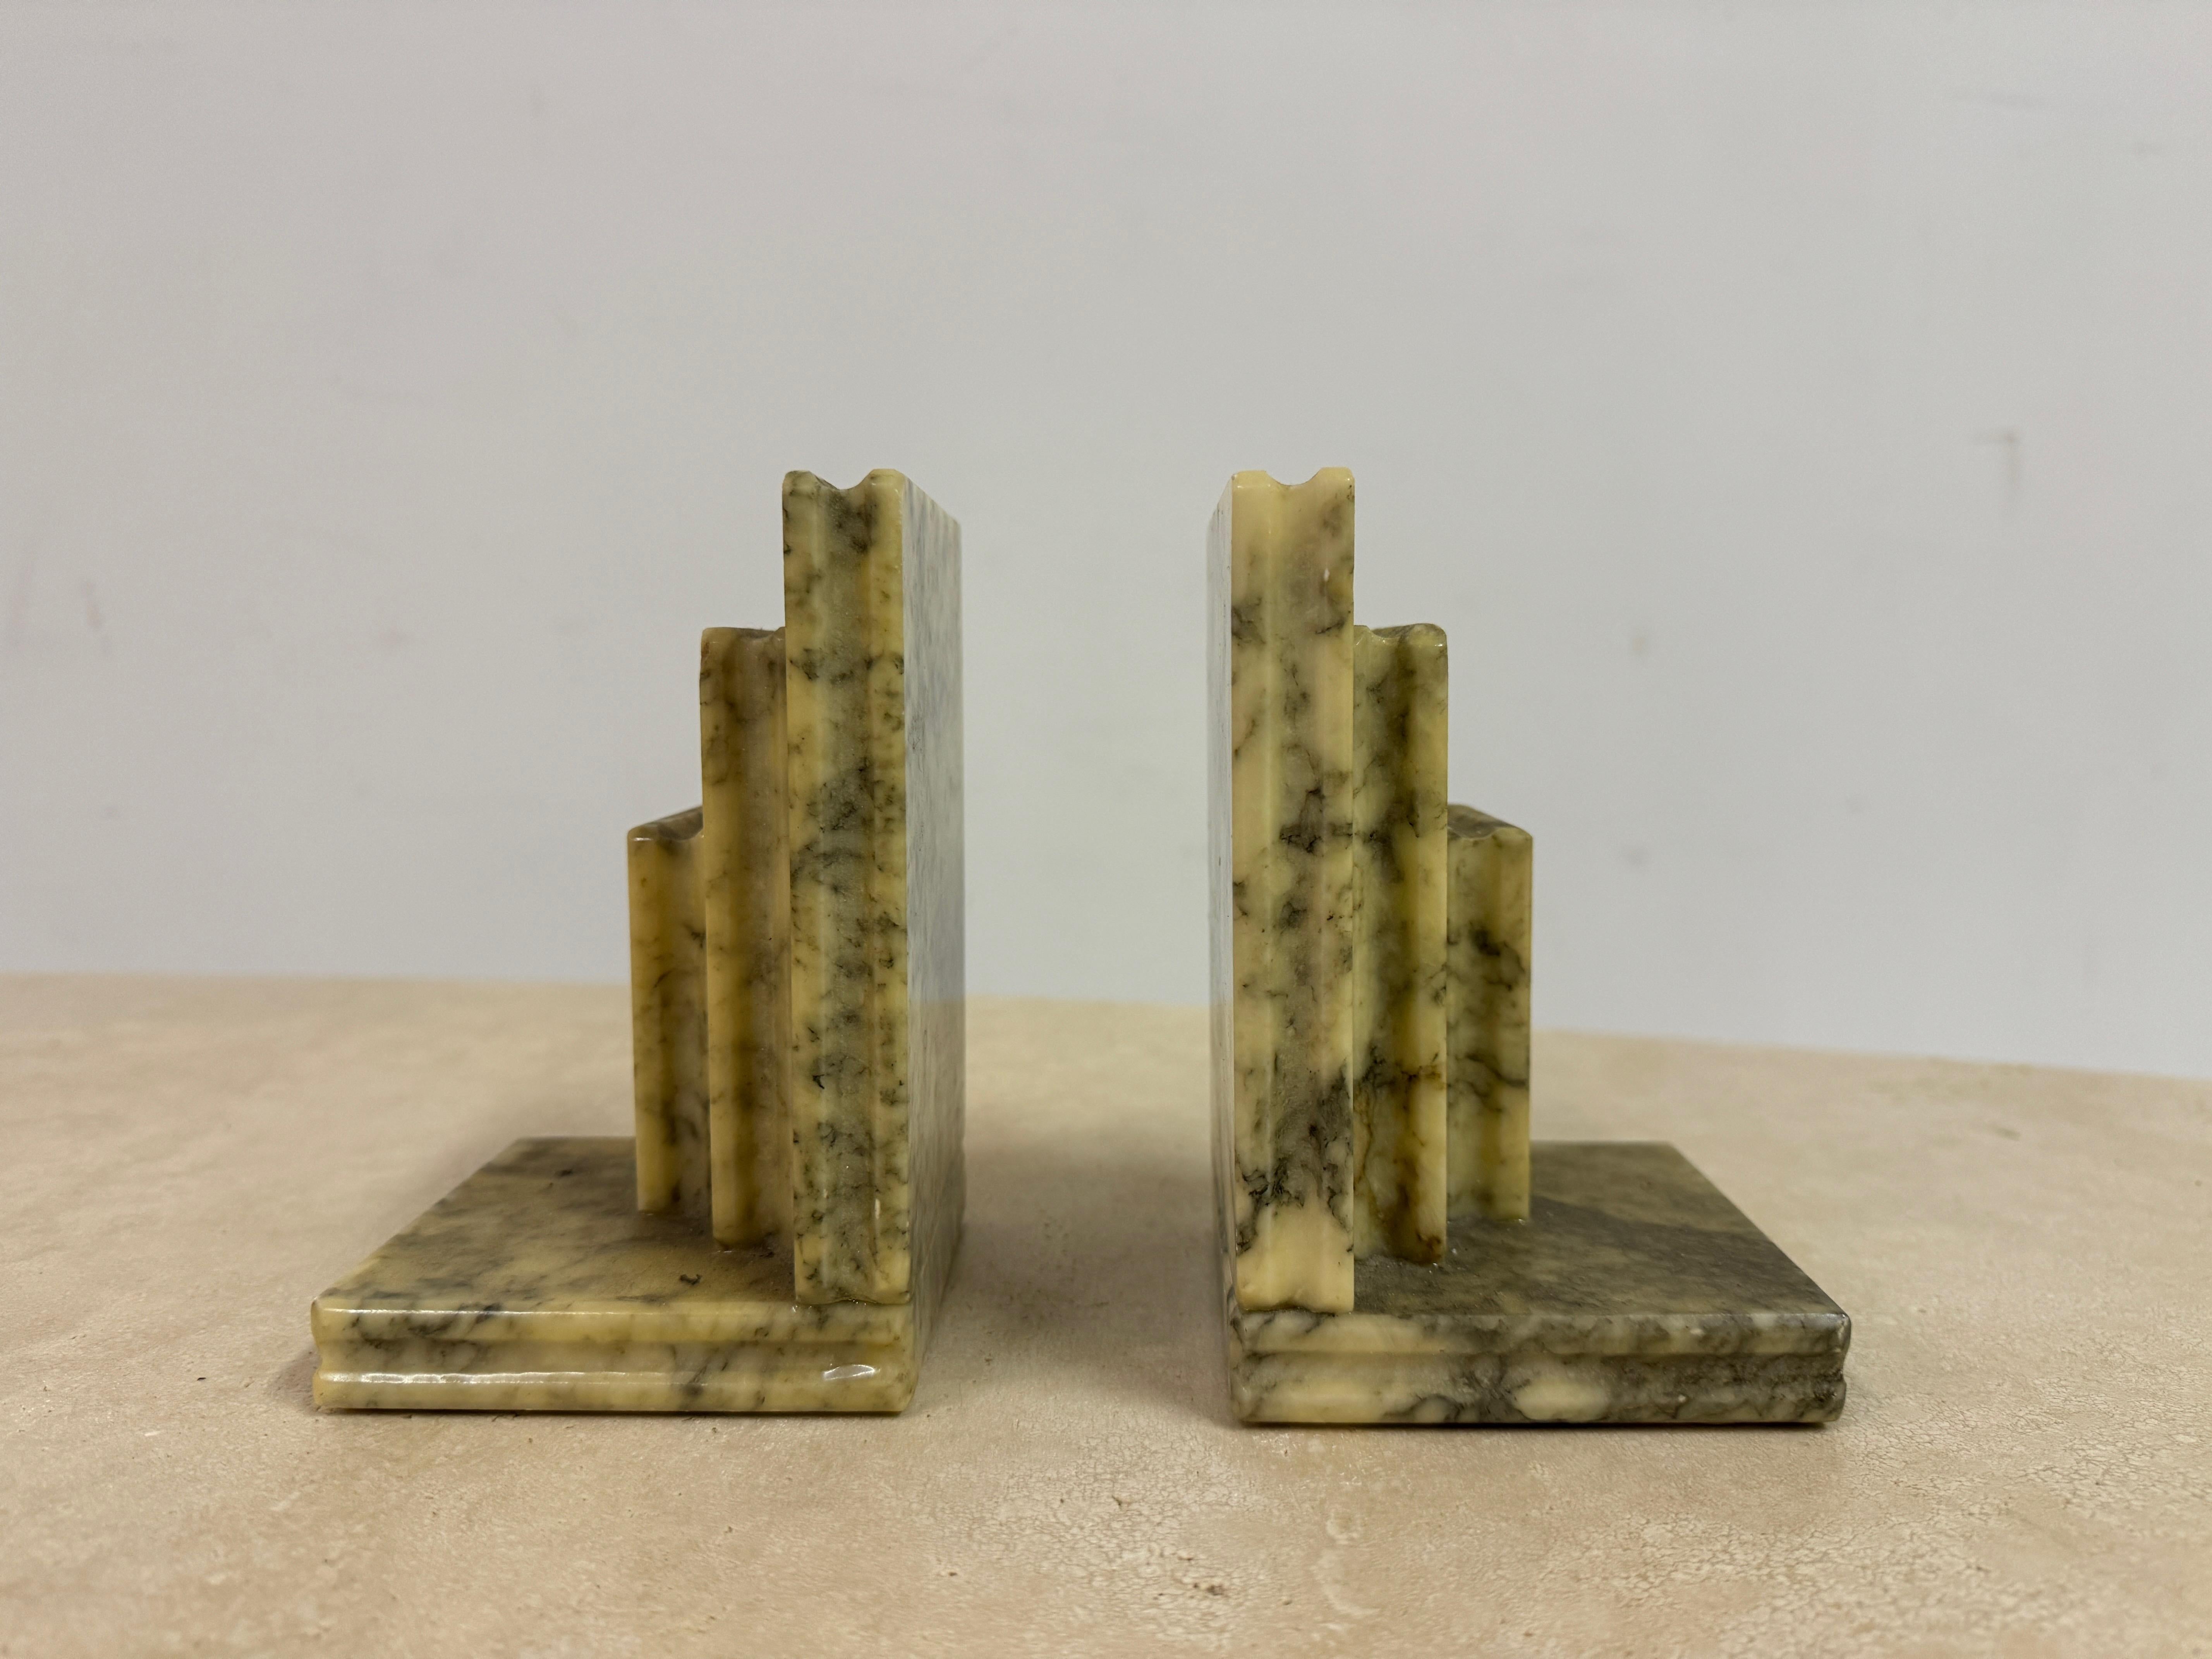 Pair of bookends

Alabaster

Handcarved 

Bookshaped

Italy Mid 20th Century